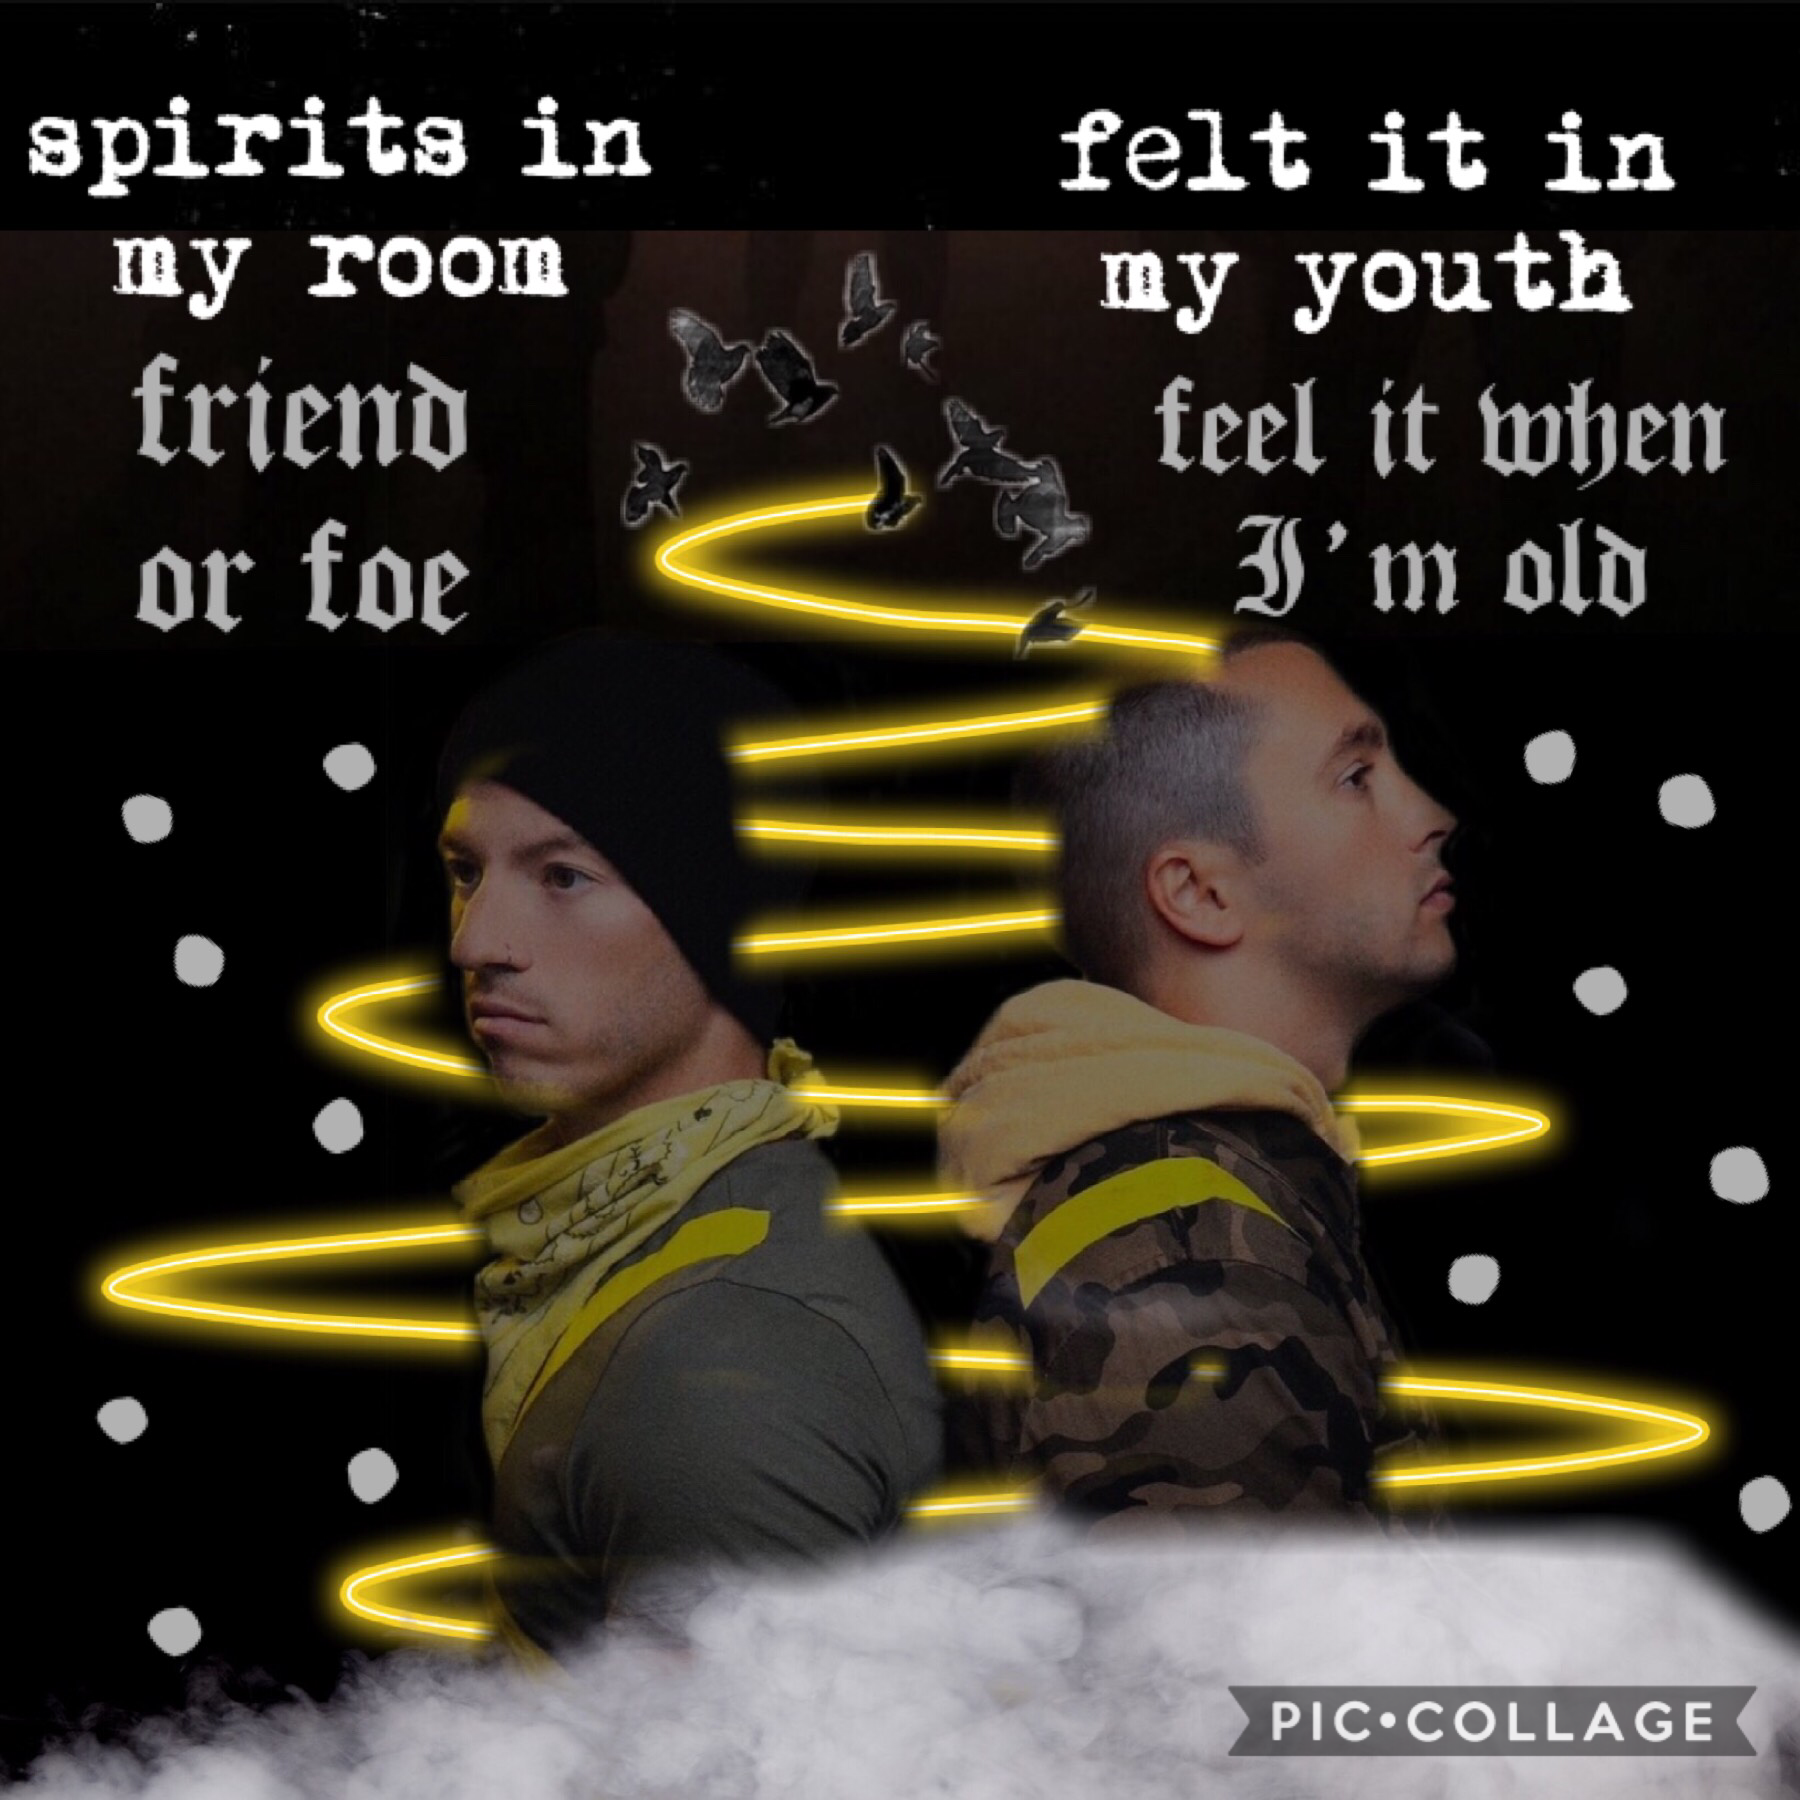 💛twenty one pilots💛 (tap)
not so sure if i like this one or not... it took literally forever though